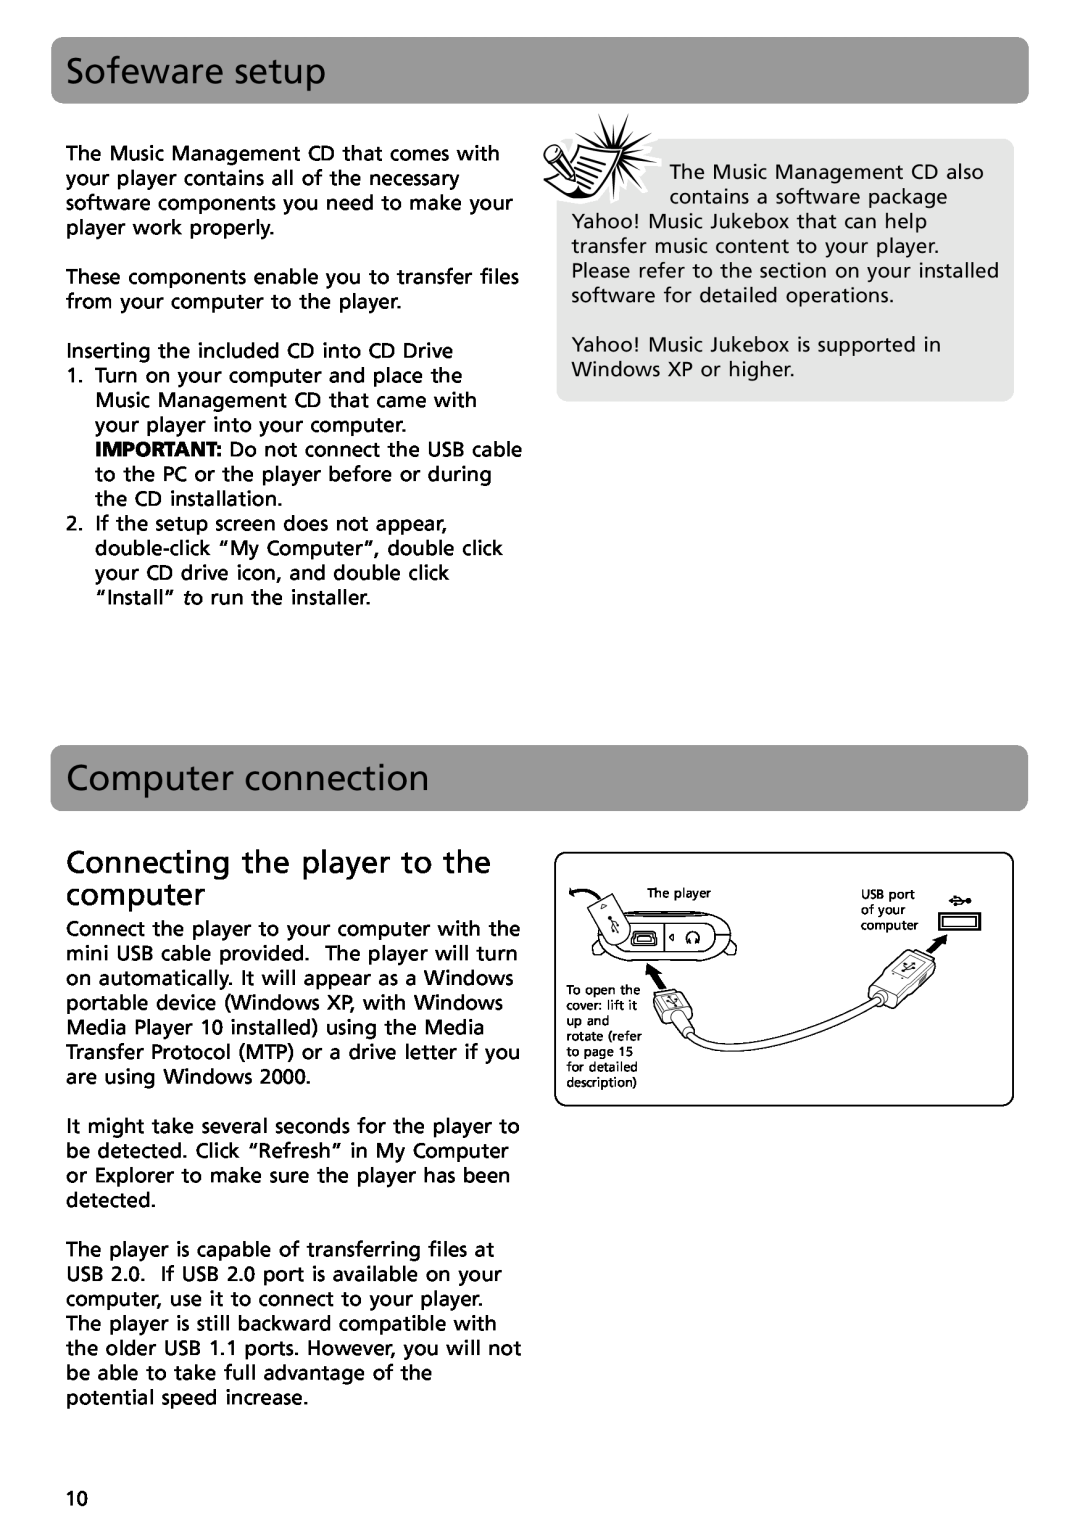 RCA S2002, SC2002, SC2001, S2001 user manual Sofeware setup, Computer connection, Connecting the player to the computer 